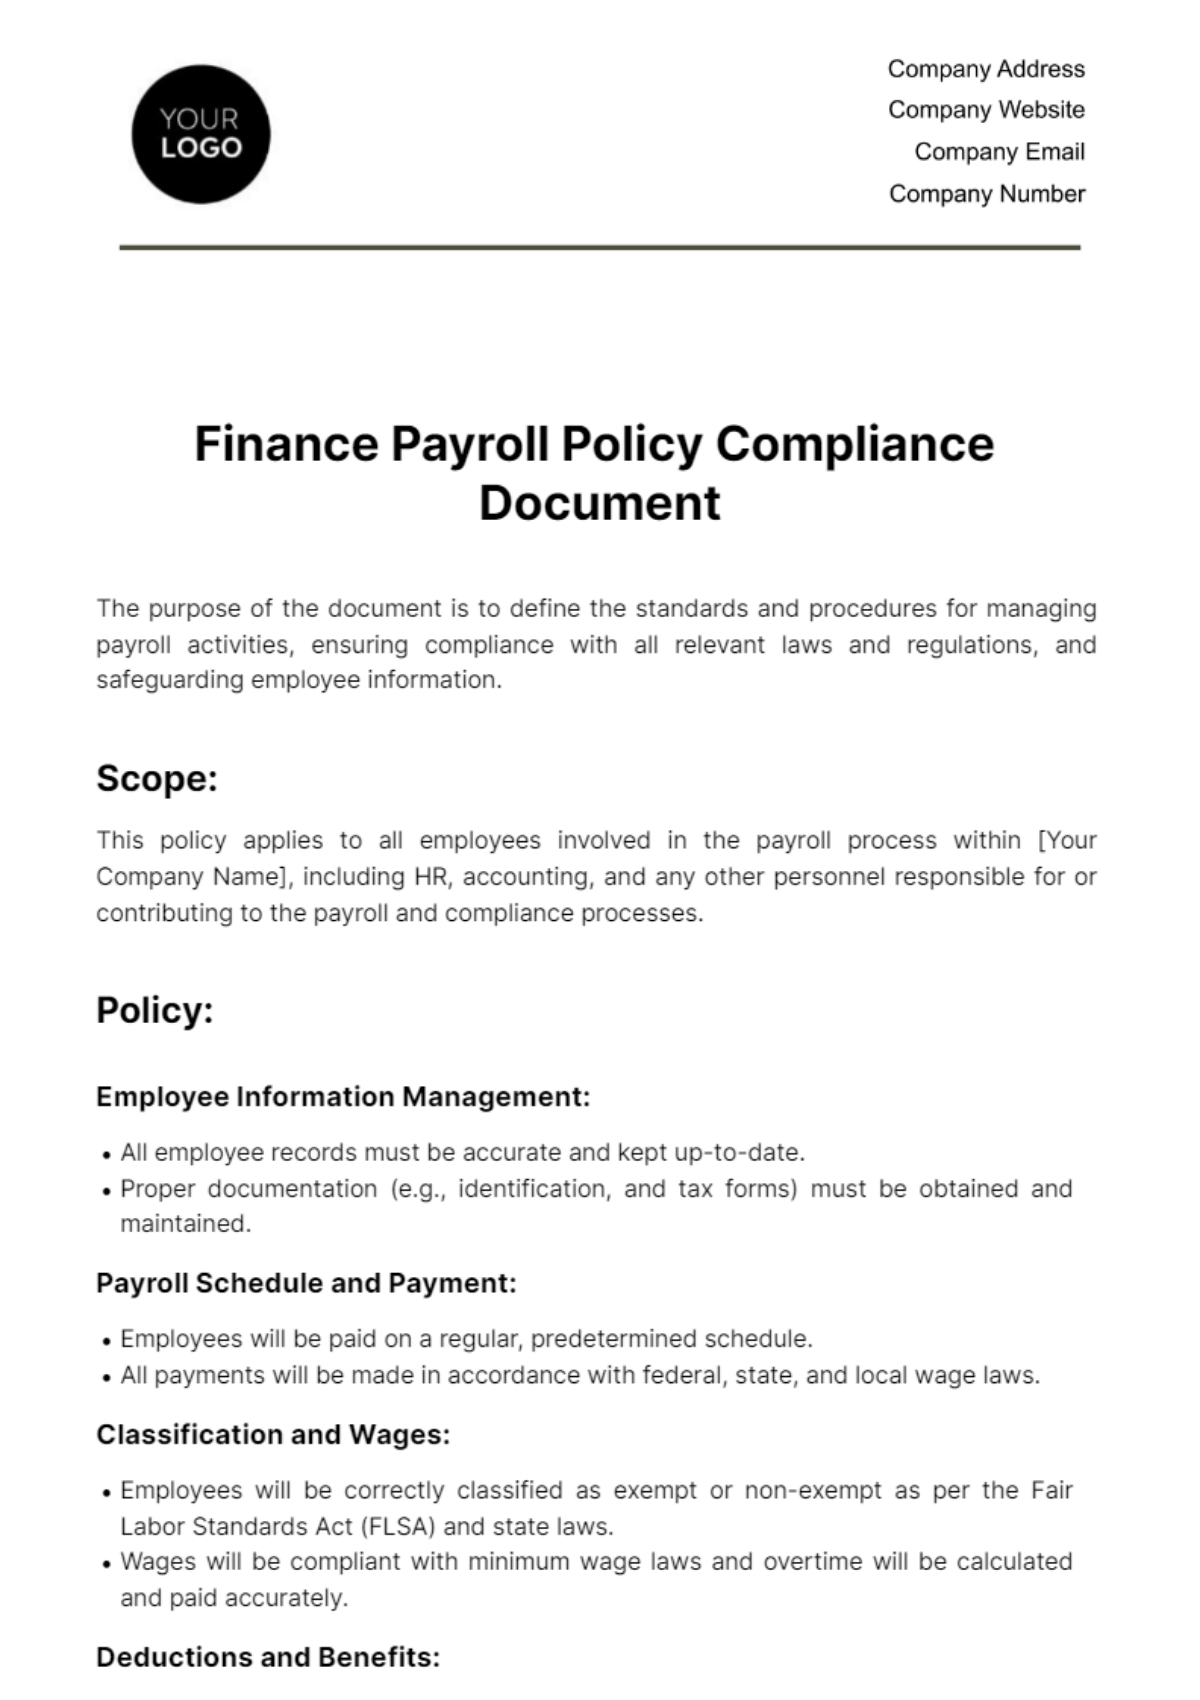 Free Finance Payroll Policy Compliance Document Template